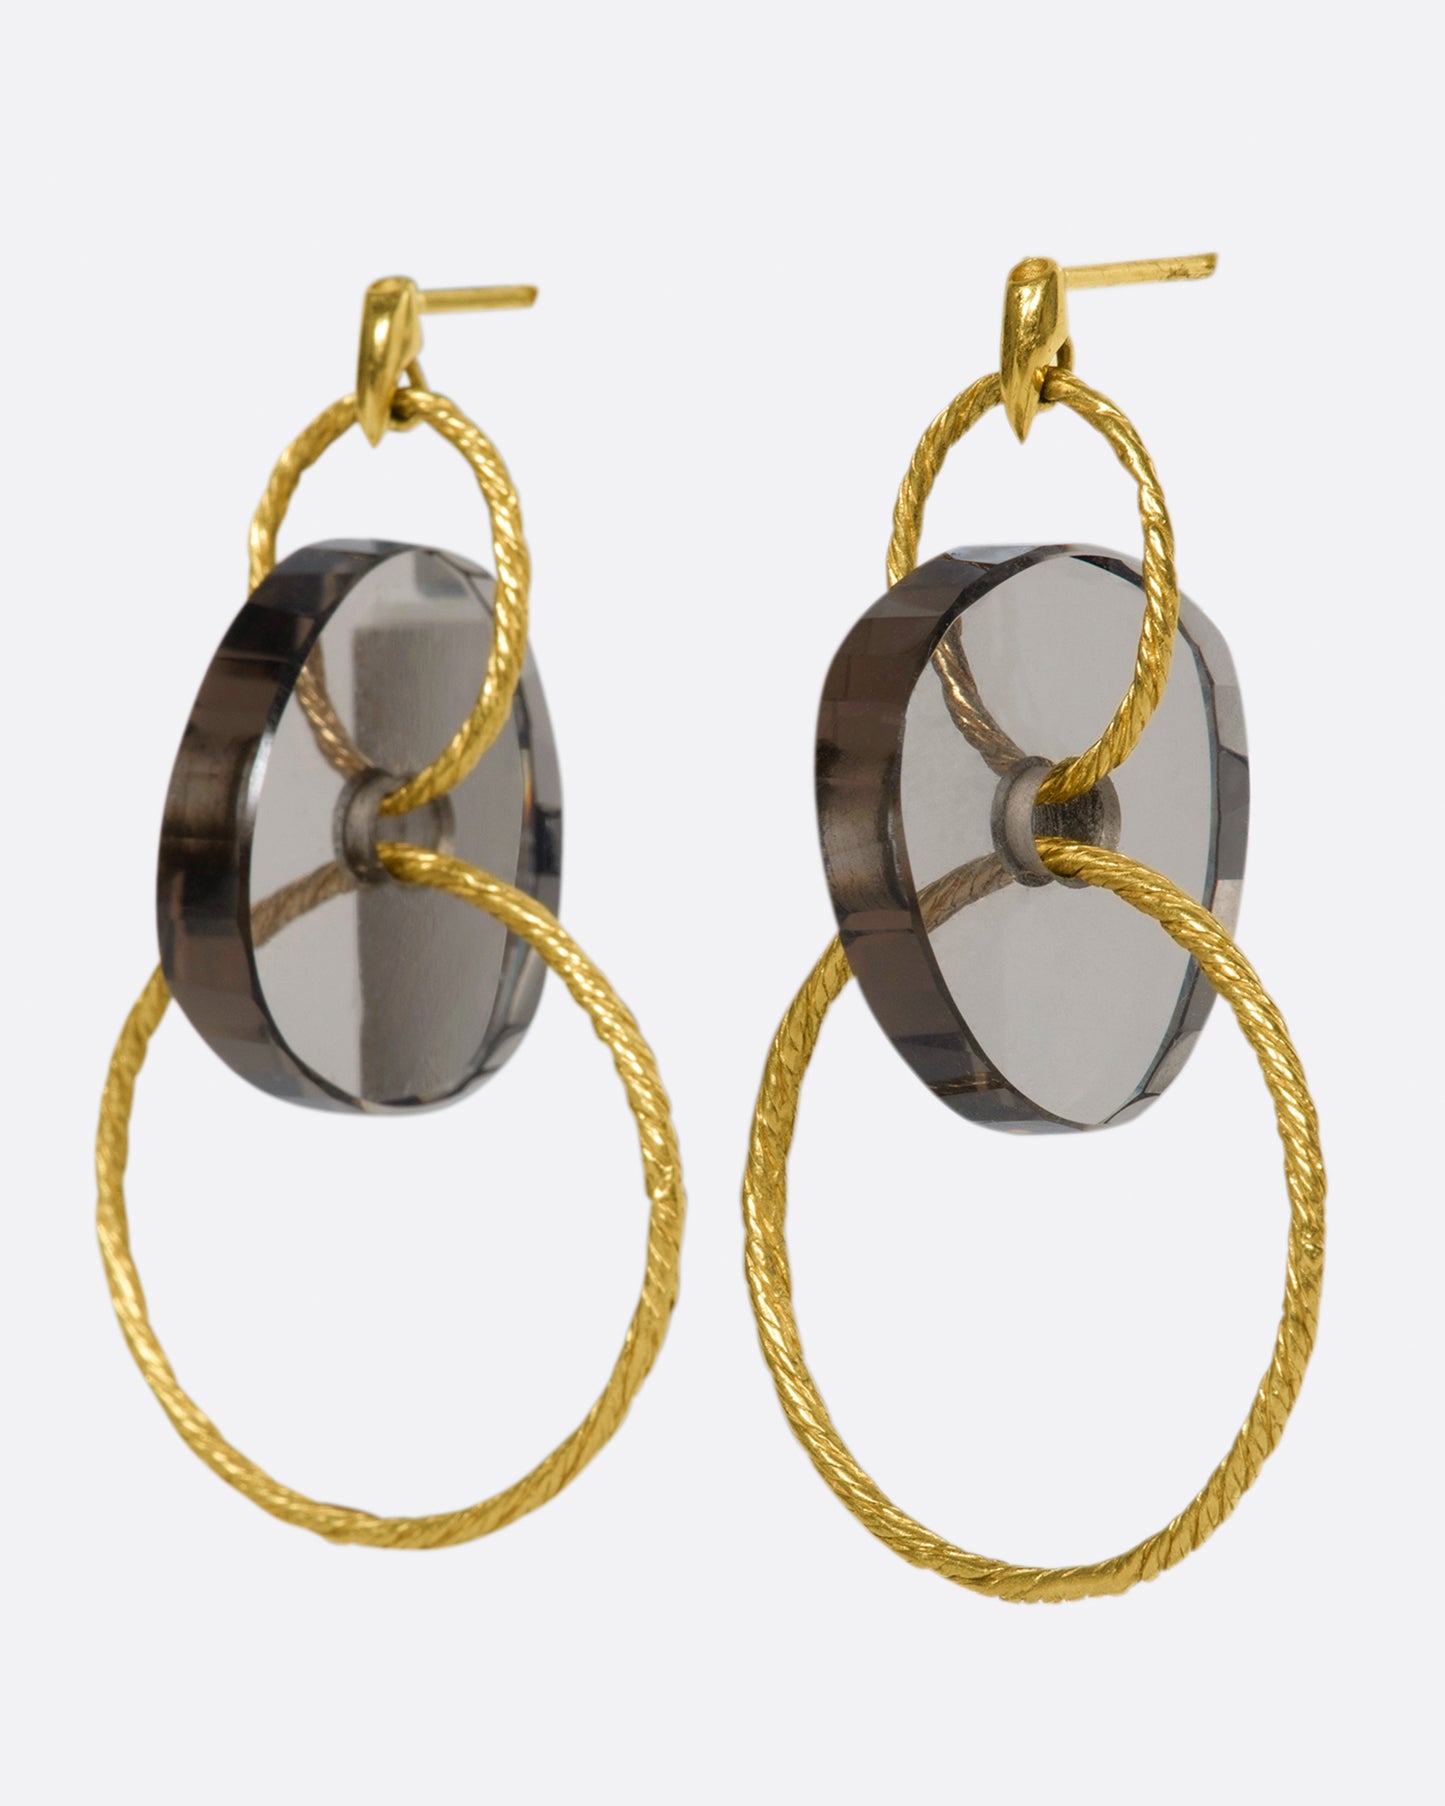 A pair of yellow gold stud earrings with two circular drops that are connected by smokey quartz beads.